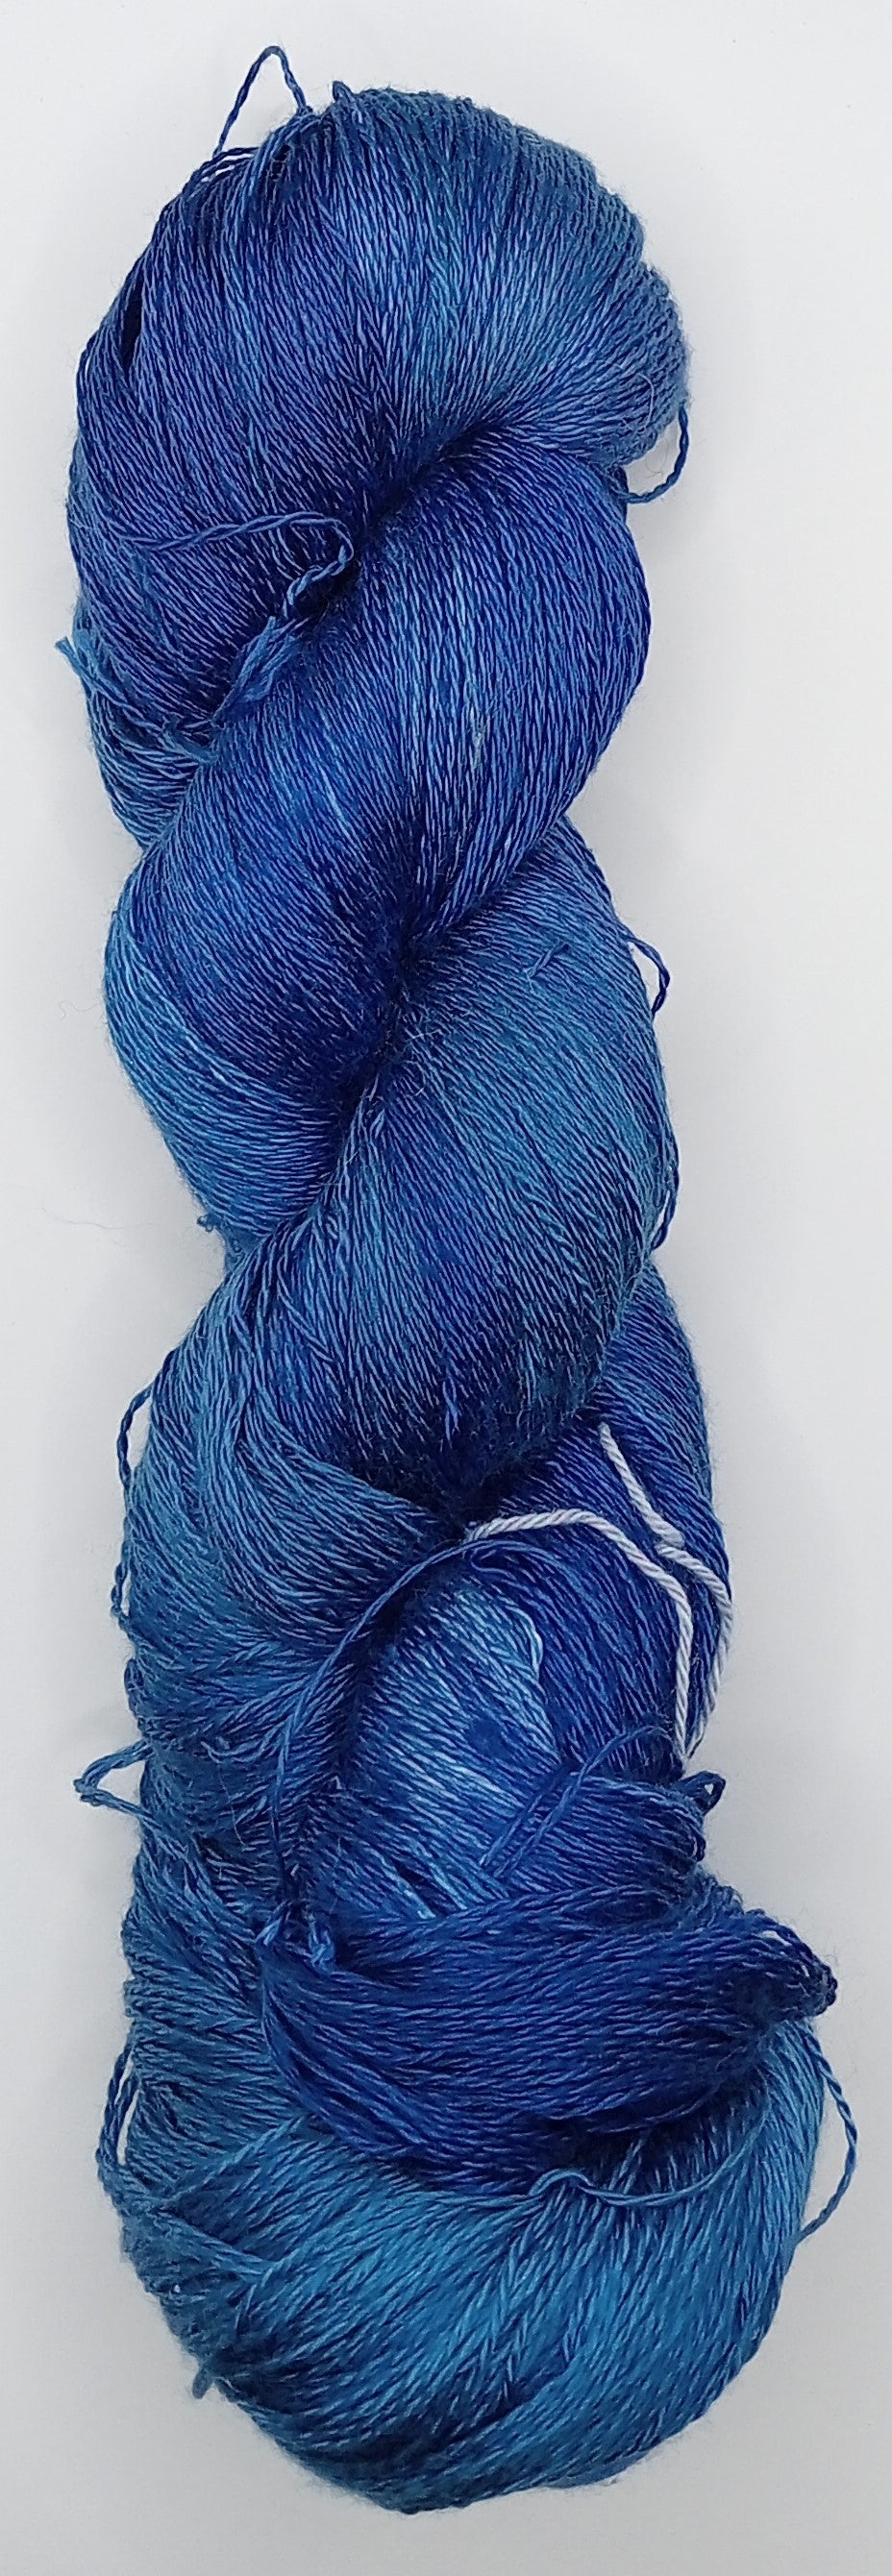 100G 'A' Grade Pure Mulberry Silk- "Royal Blues" Hand Dyed Luxury Lace weight